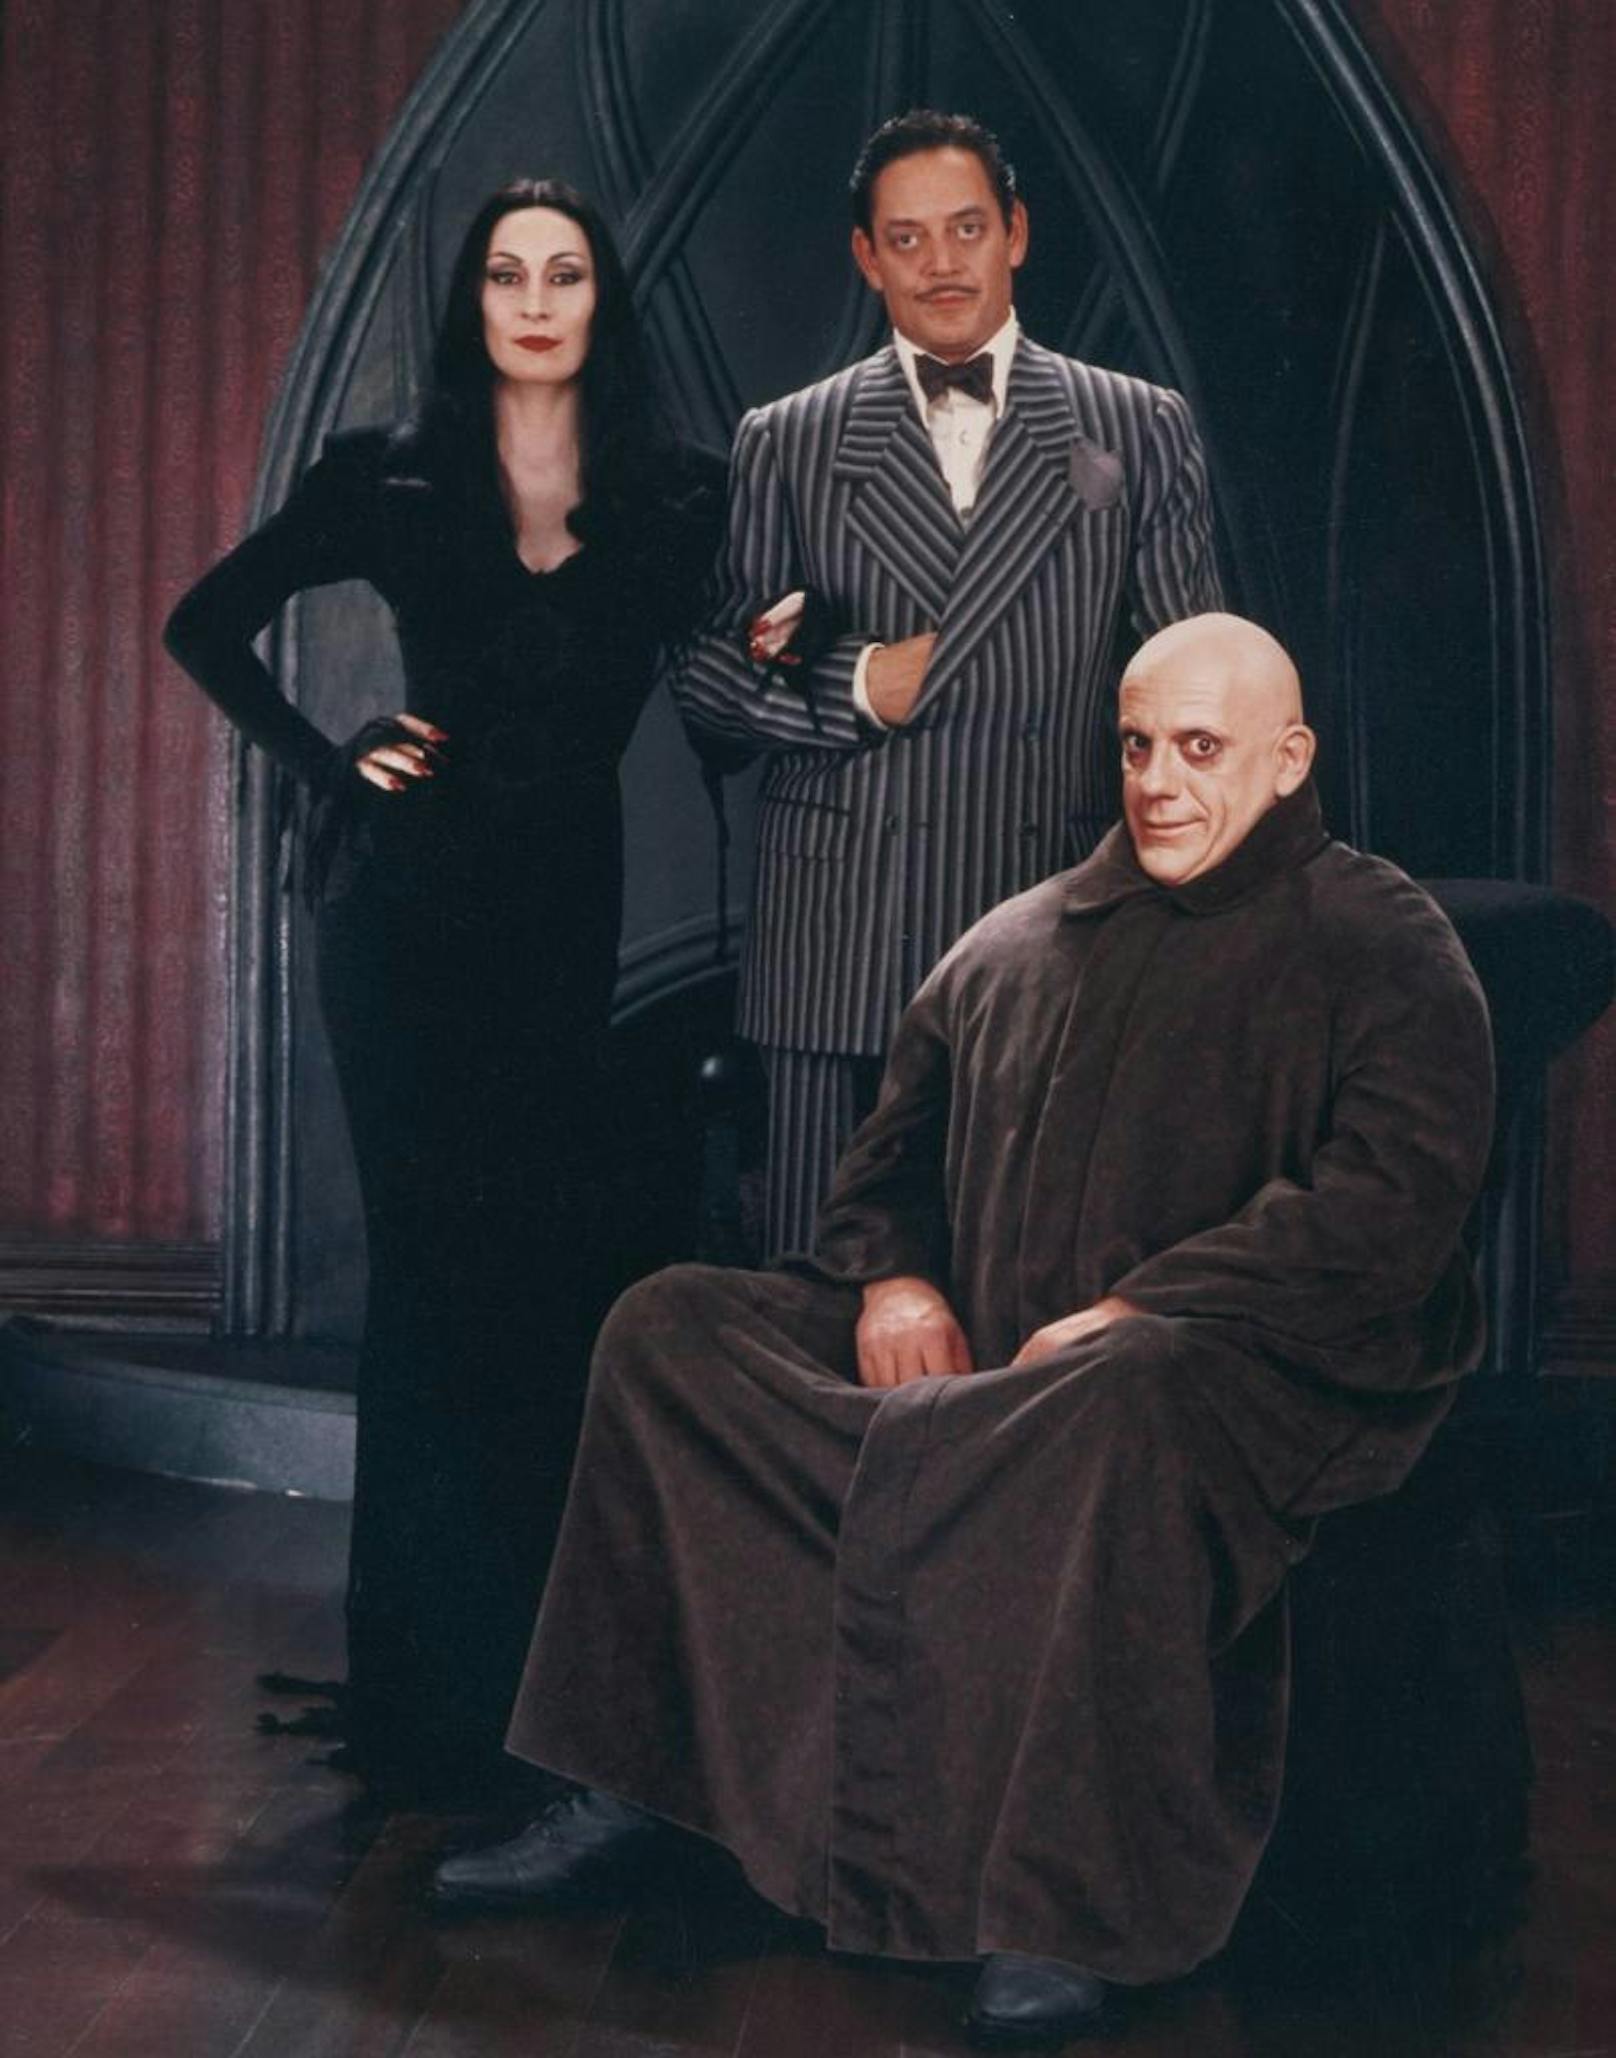 The Addams Family 